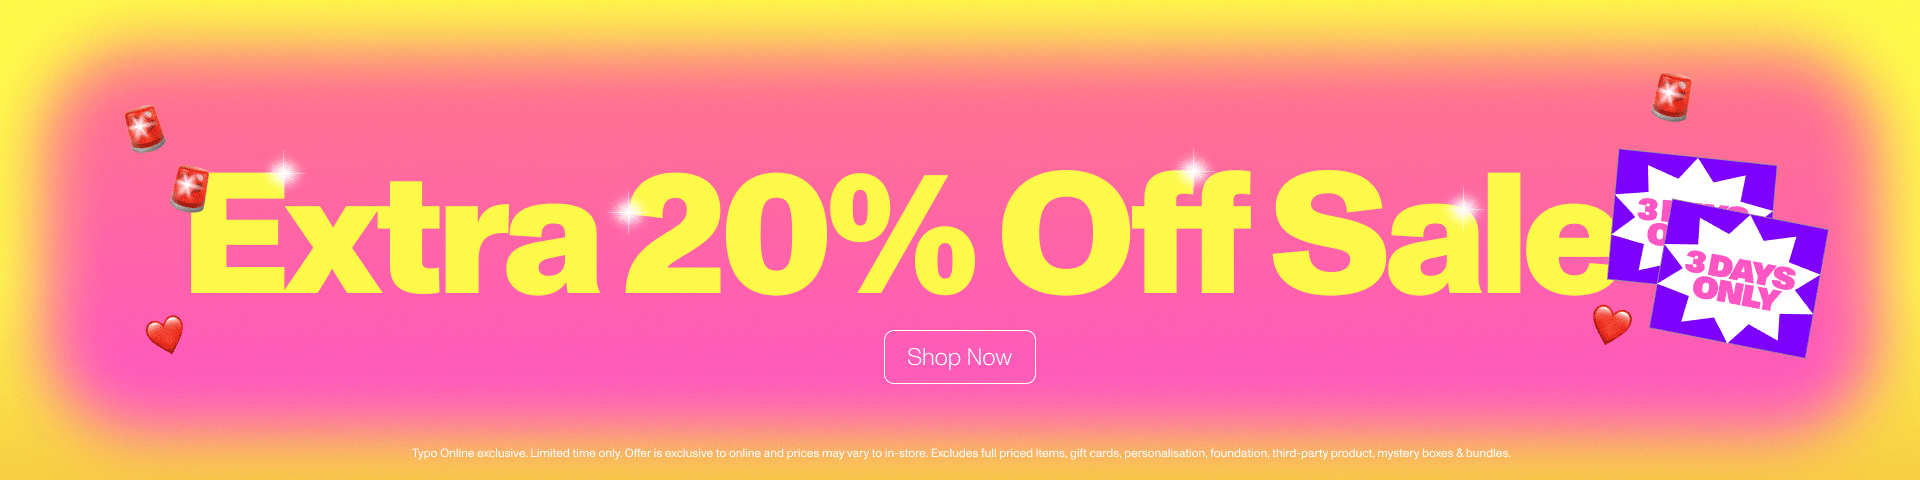 Extra 20% off sale. 2 days only. Shop now.